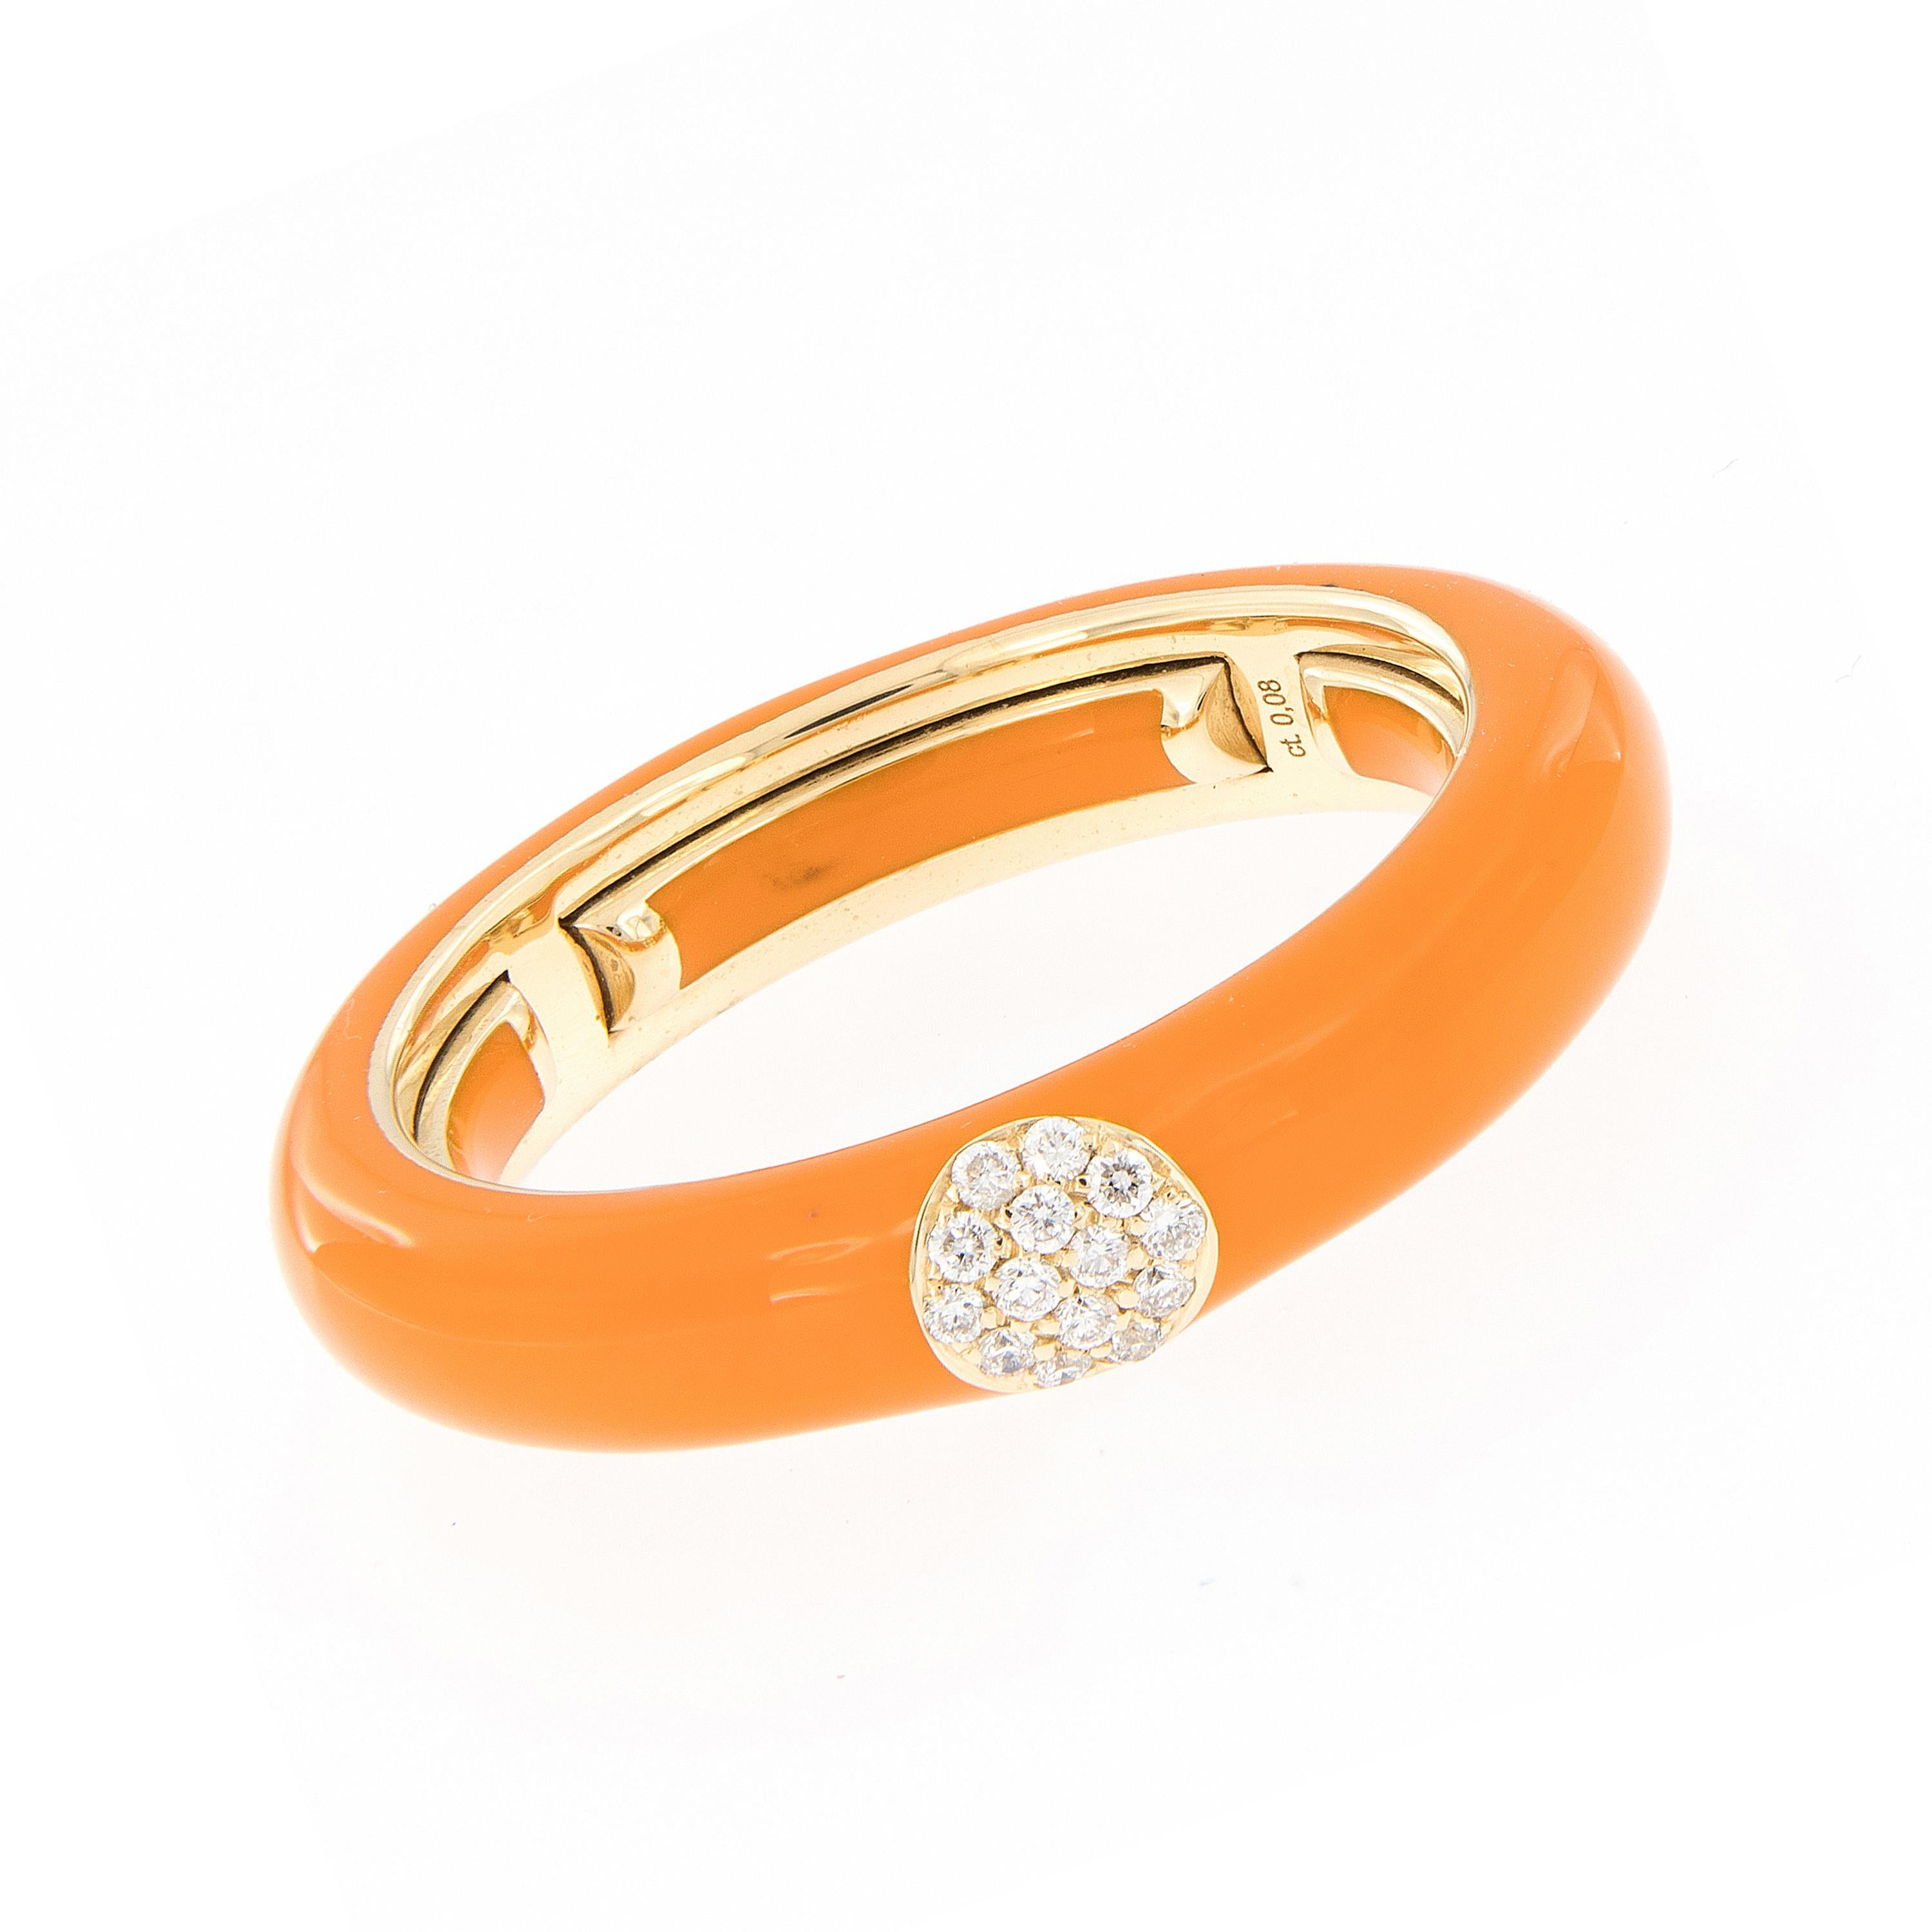 Bold, bright and beautiful! This contemporary enamel ring is hand-crafted in Italy for Campanelli & Pear. Ring is 18k yellow gold featuring a smooth enamel finish in orange and accented with 14 pave set diamonds. The ring features a unique